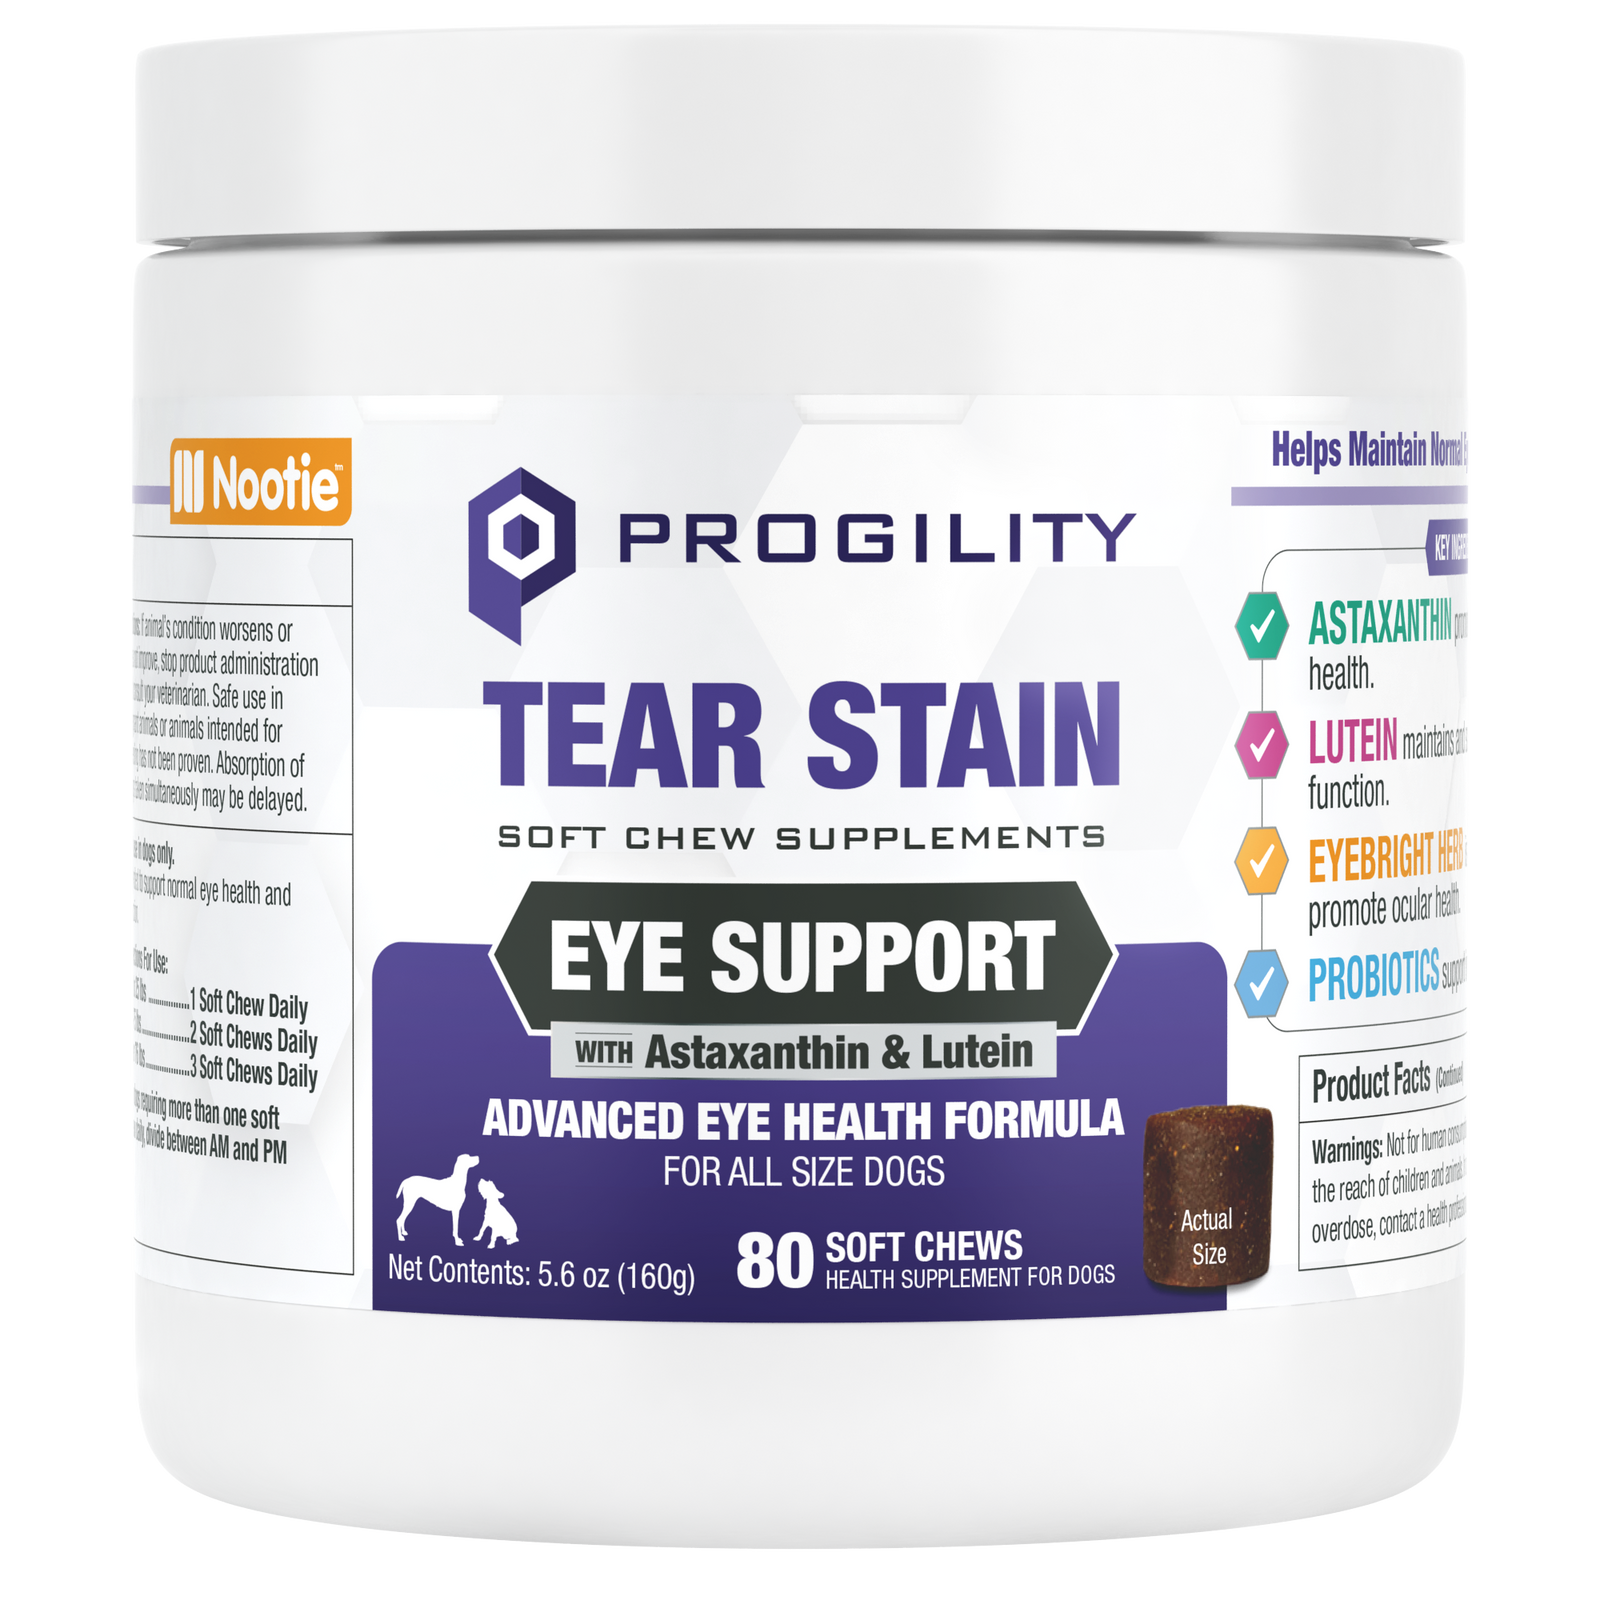 Progility Tear Stain Eye Support Soft Chew Supplement for Dogs | Helps Maintain Normal Eye Health & Function